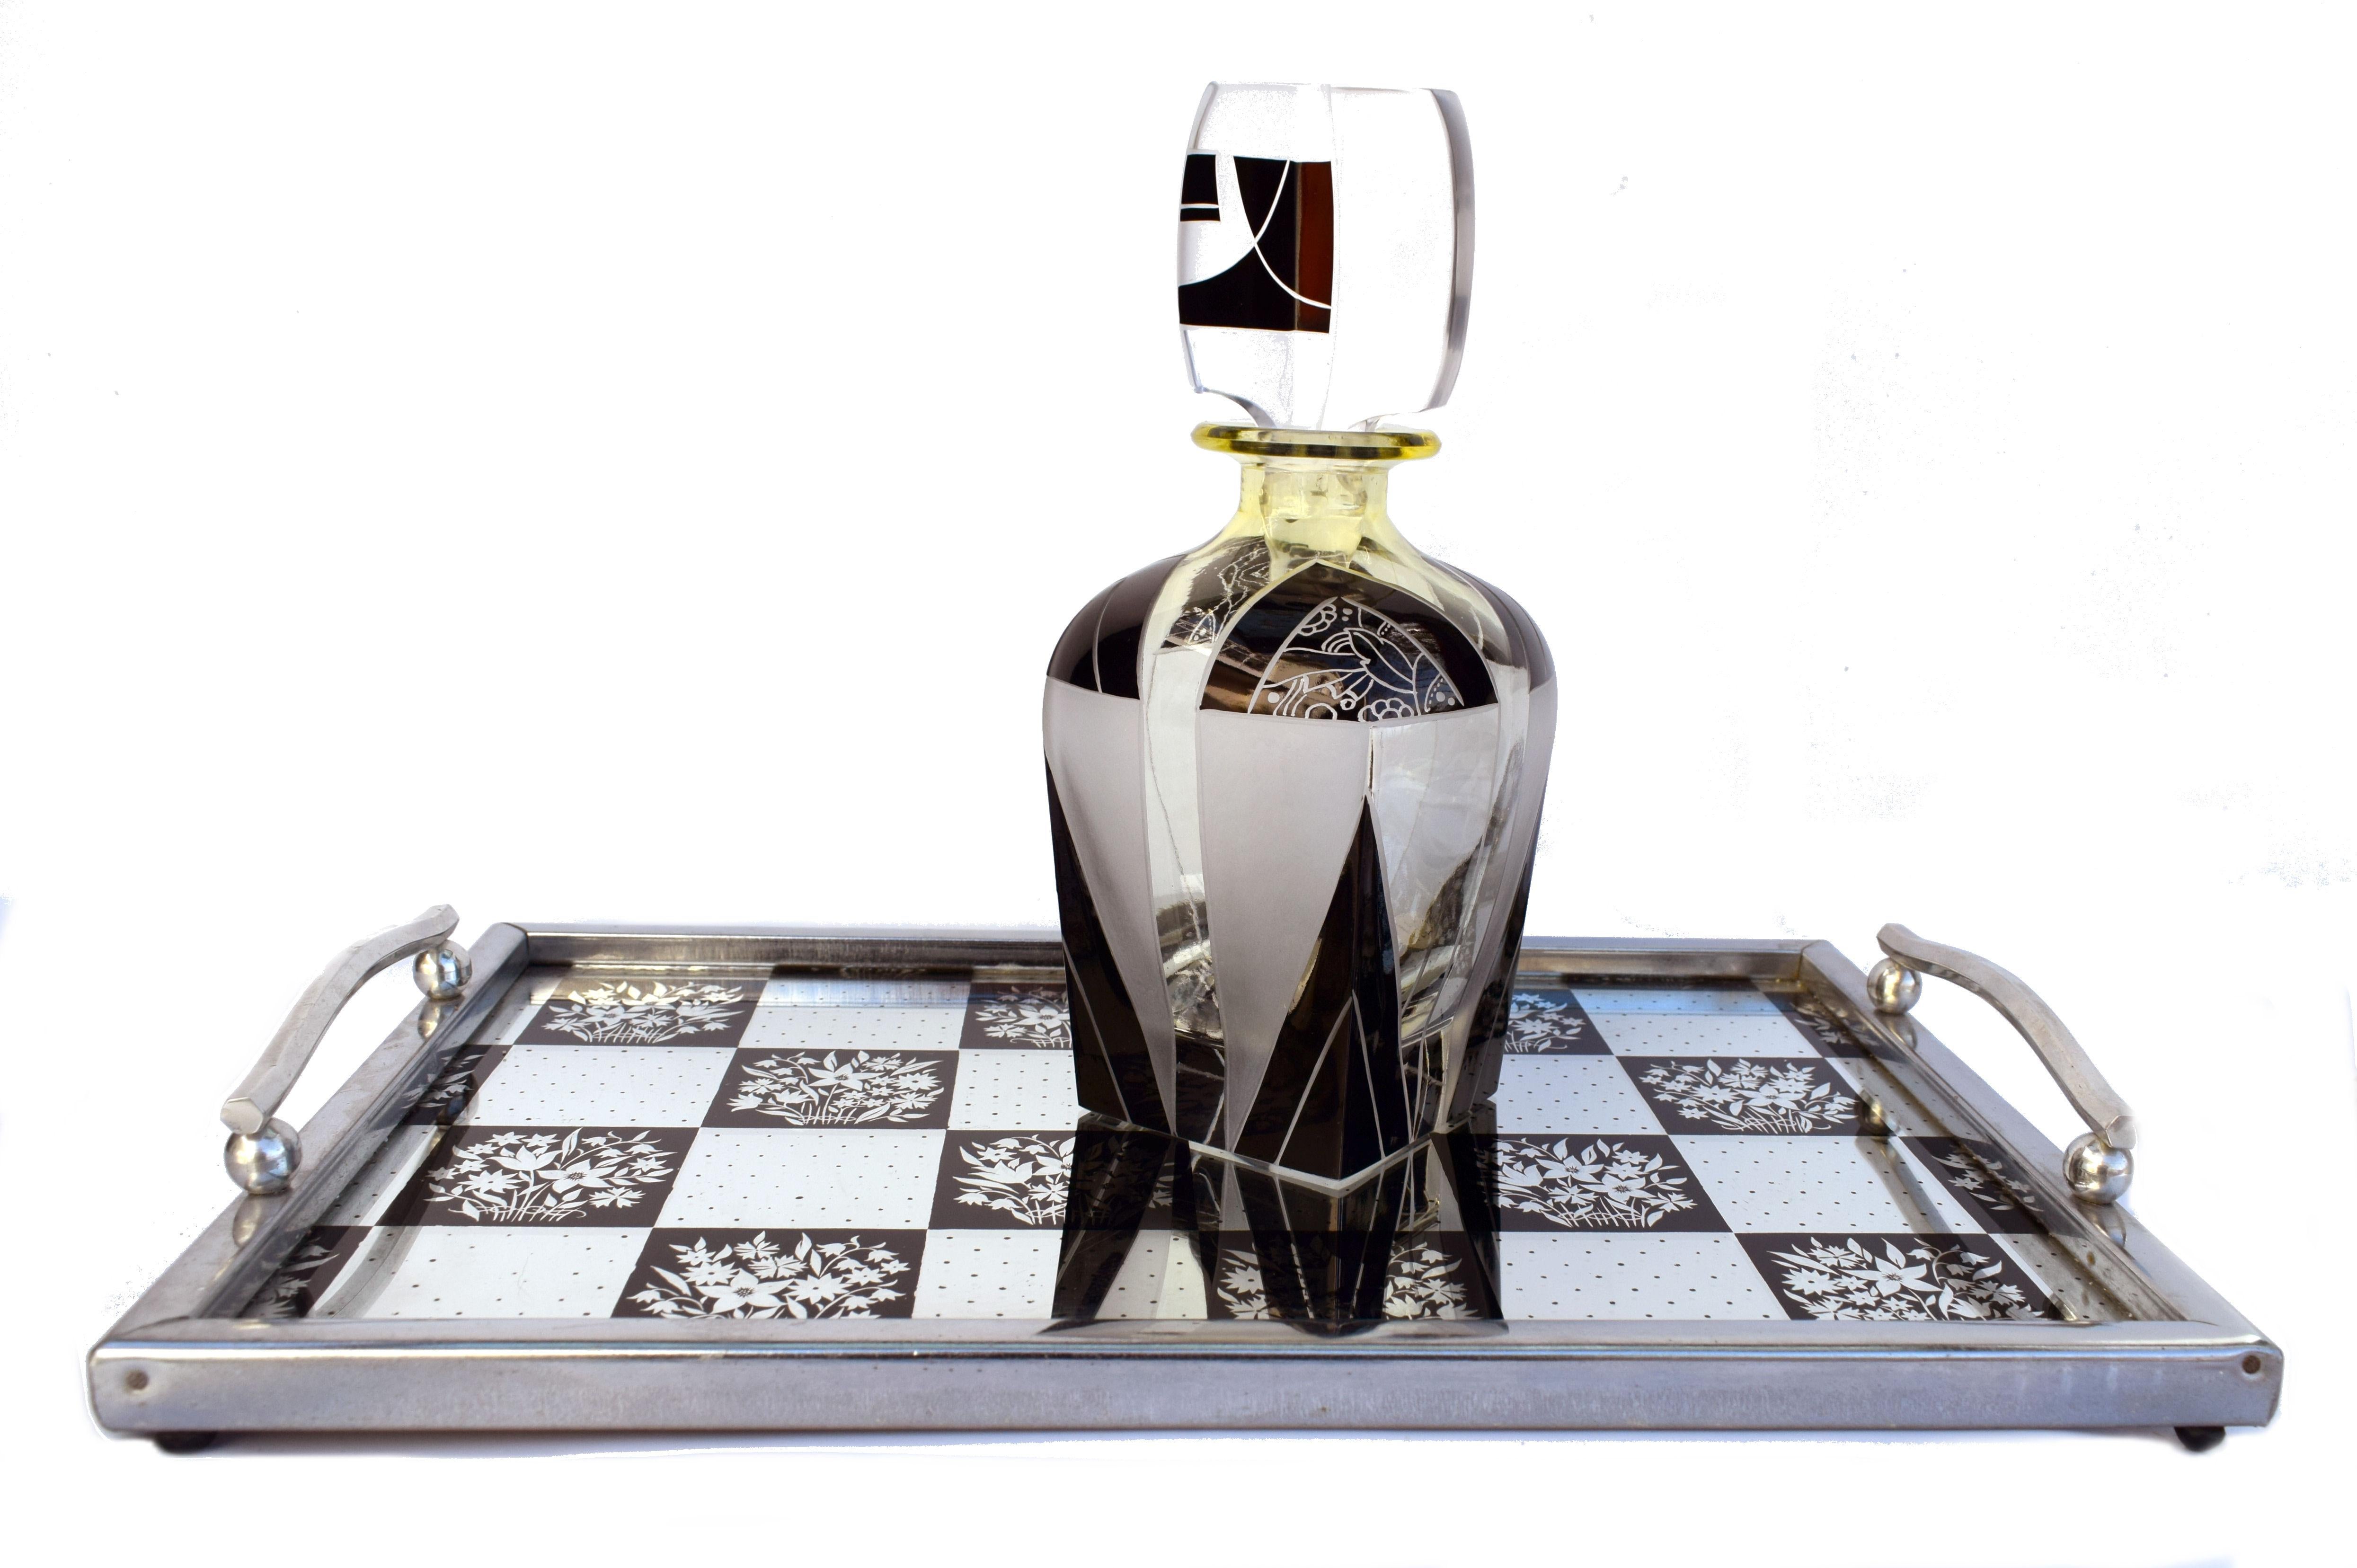 Art Deco 1930s Mirrored Barware Drinks Tray In Good Condition For Sale In Devon, England